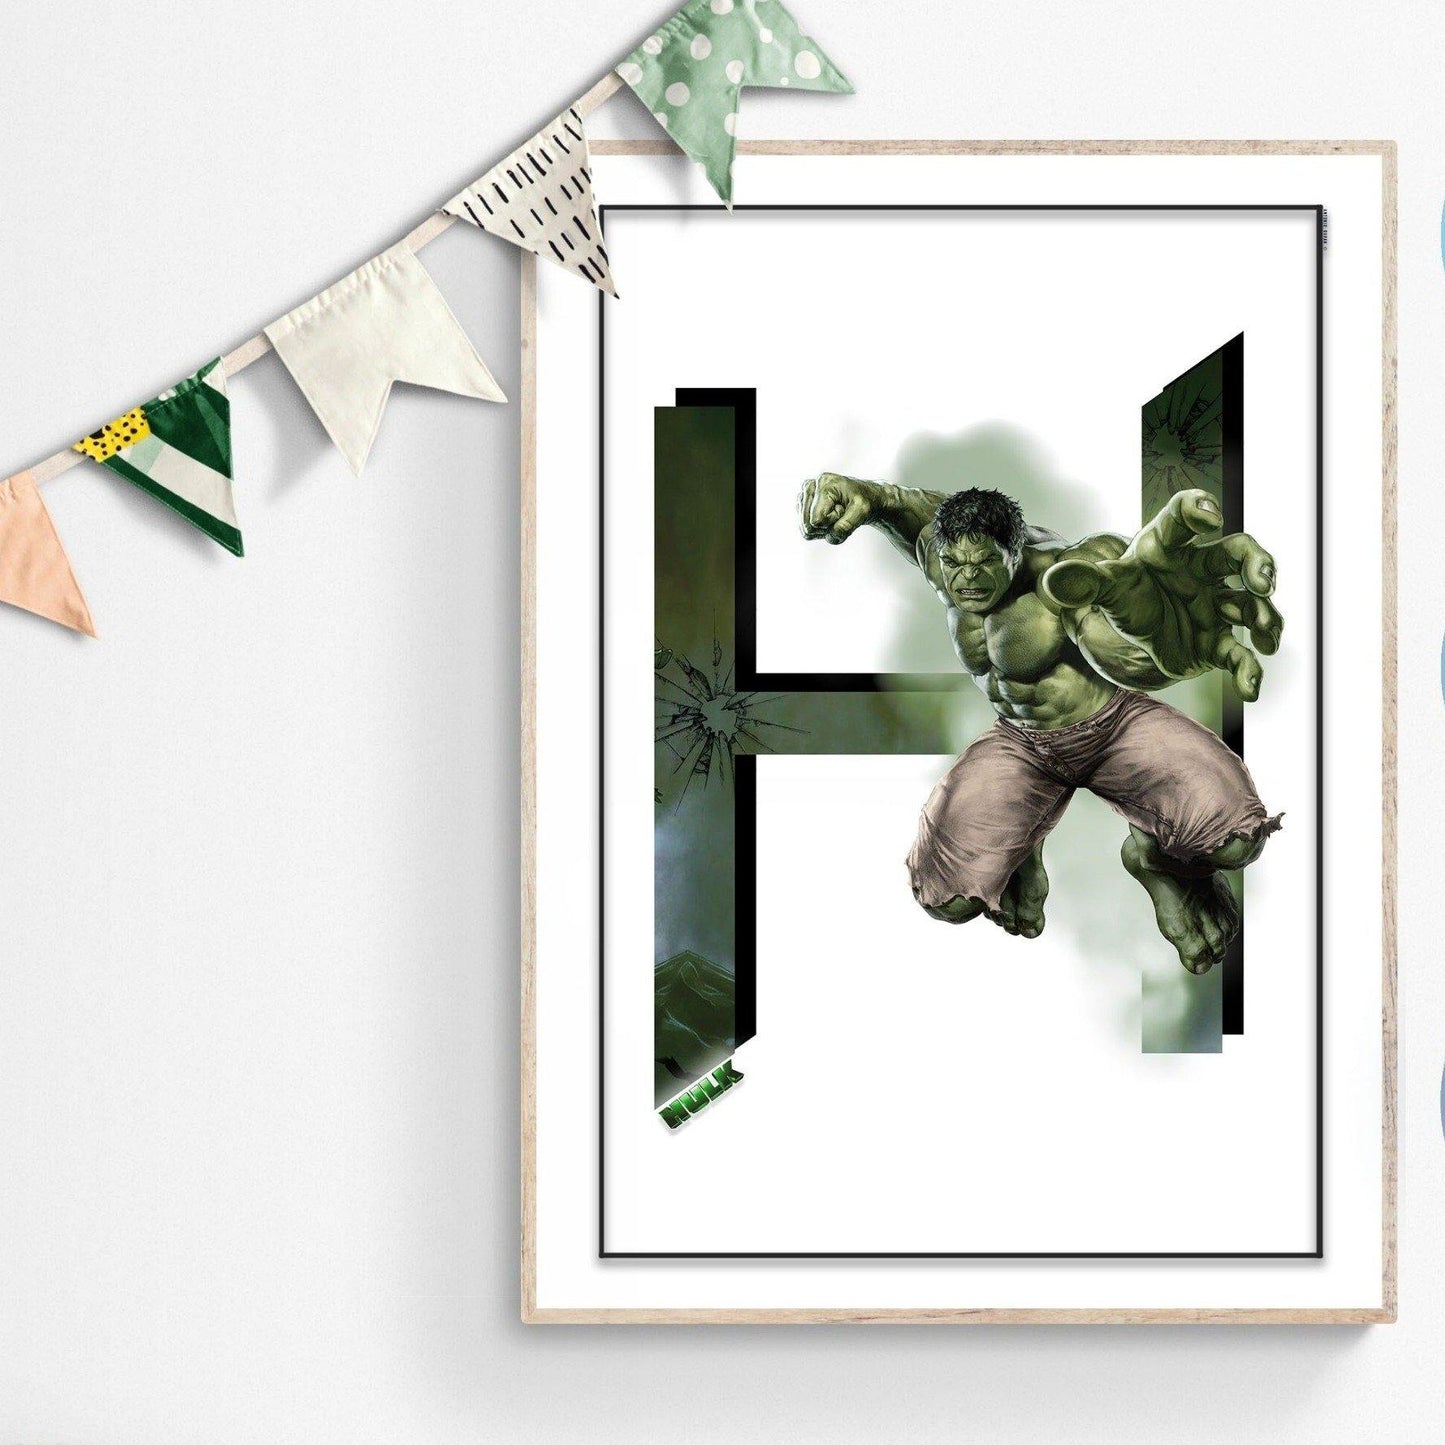 The Hulk Movie Poster features iconic Disney characters in a single print on demand wall art. From classic Disney movies to Disney World posters, this one-of-a-kind artwork is sure to adorn any room in your home with eye-catching colour and bring joy to Disney fans. Choose from a variety of fine art prints or wall movies to add beauty to your space. 98types